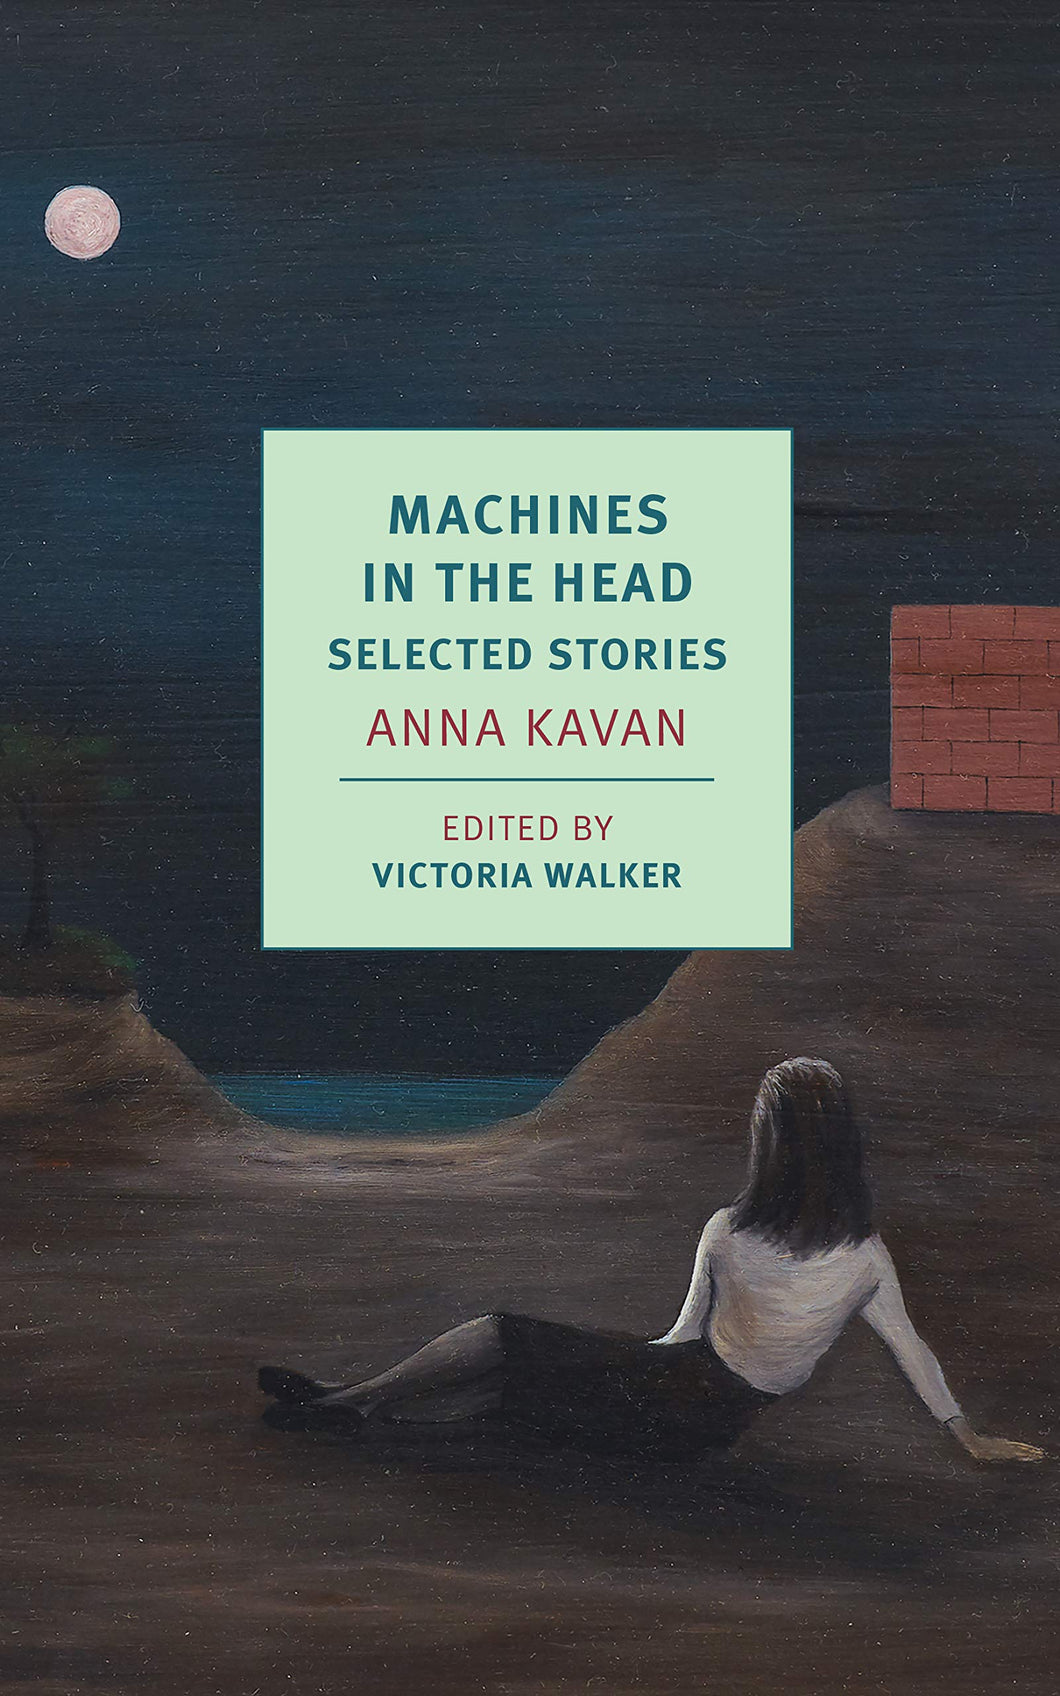 Machines in the Head: Selected Stories by Anna Kavan